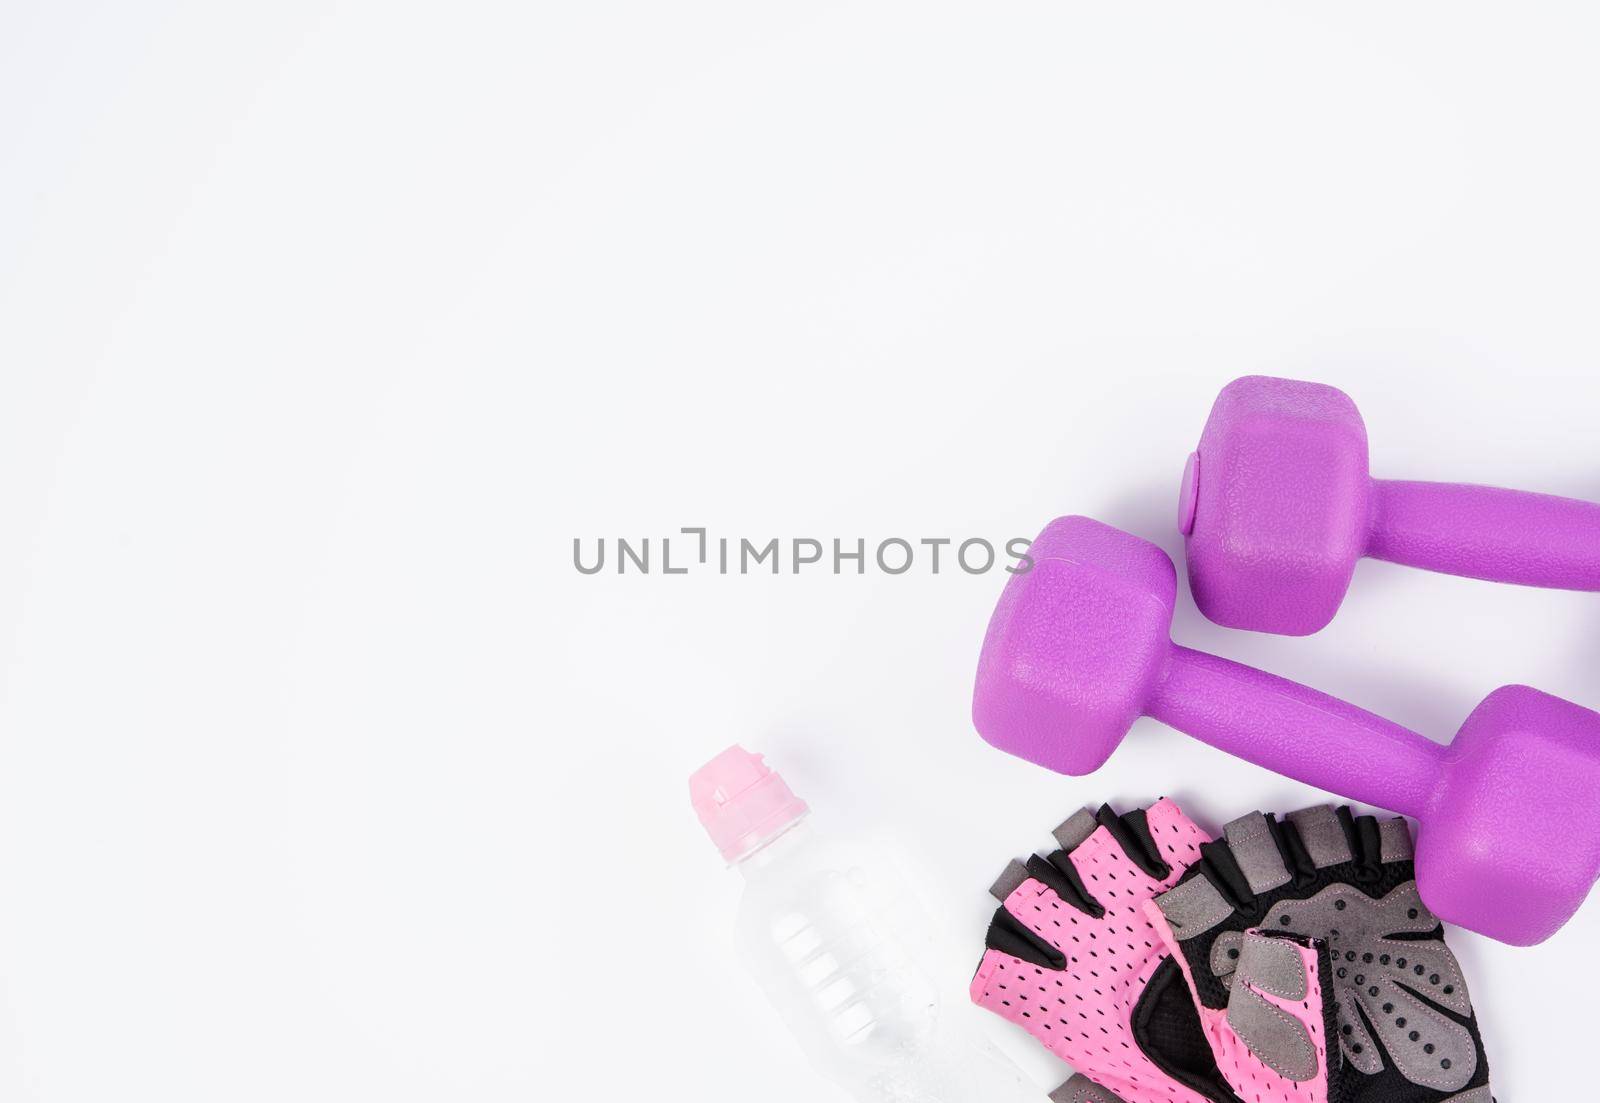 sports gloves, pair of purple dumbbells and and bottle of water on a white background by ndanko